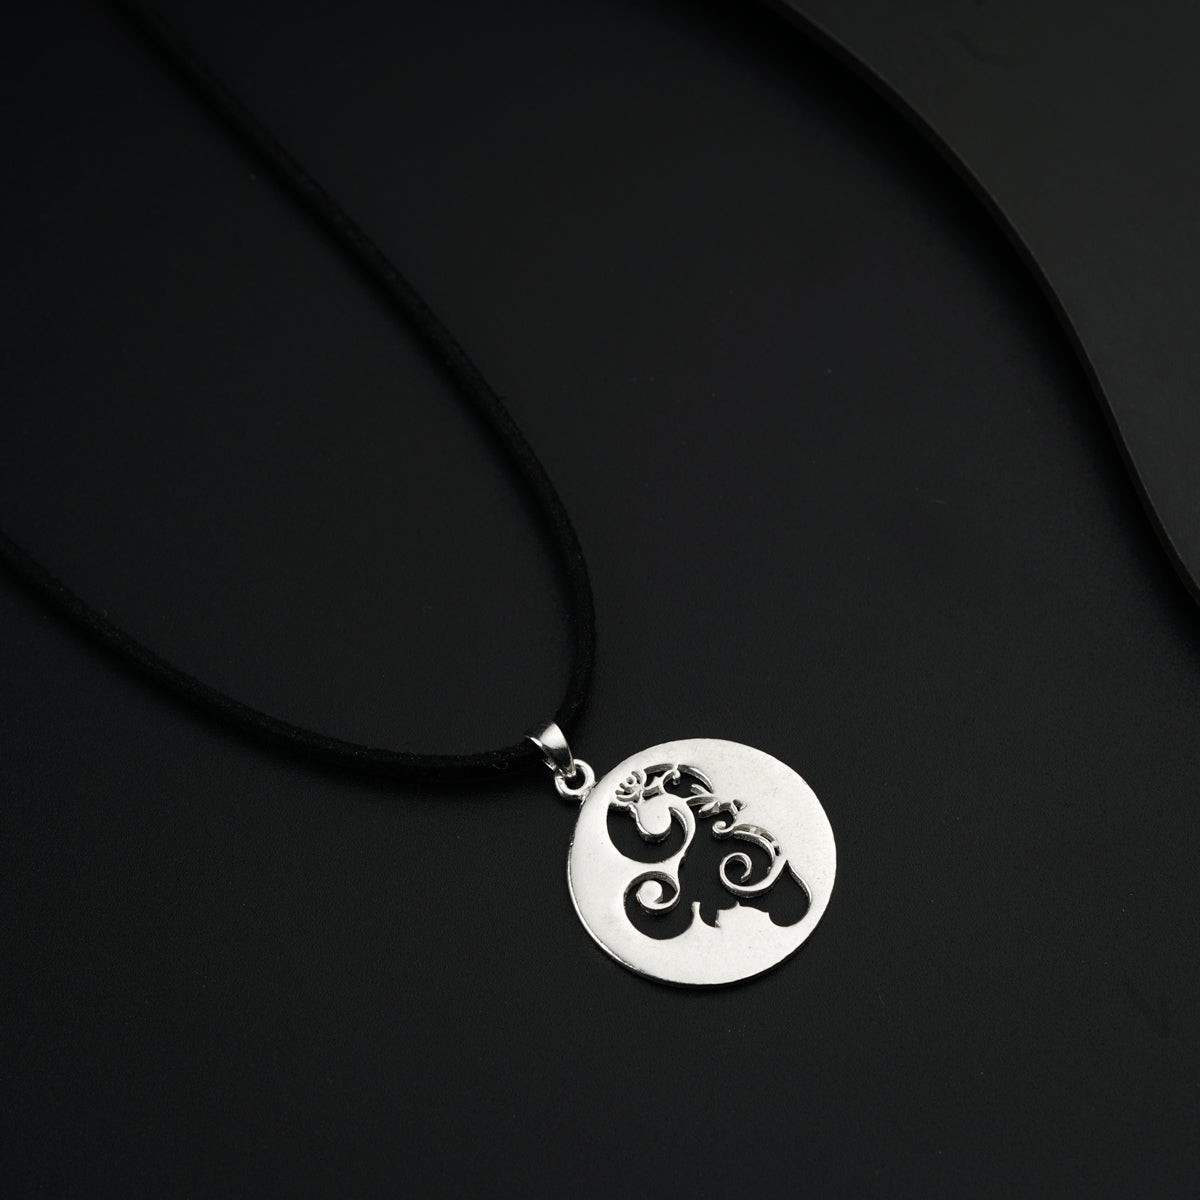 a black and white photo of a necklace with an elephant on it